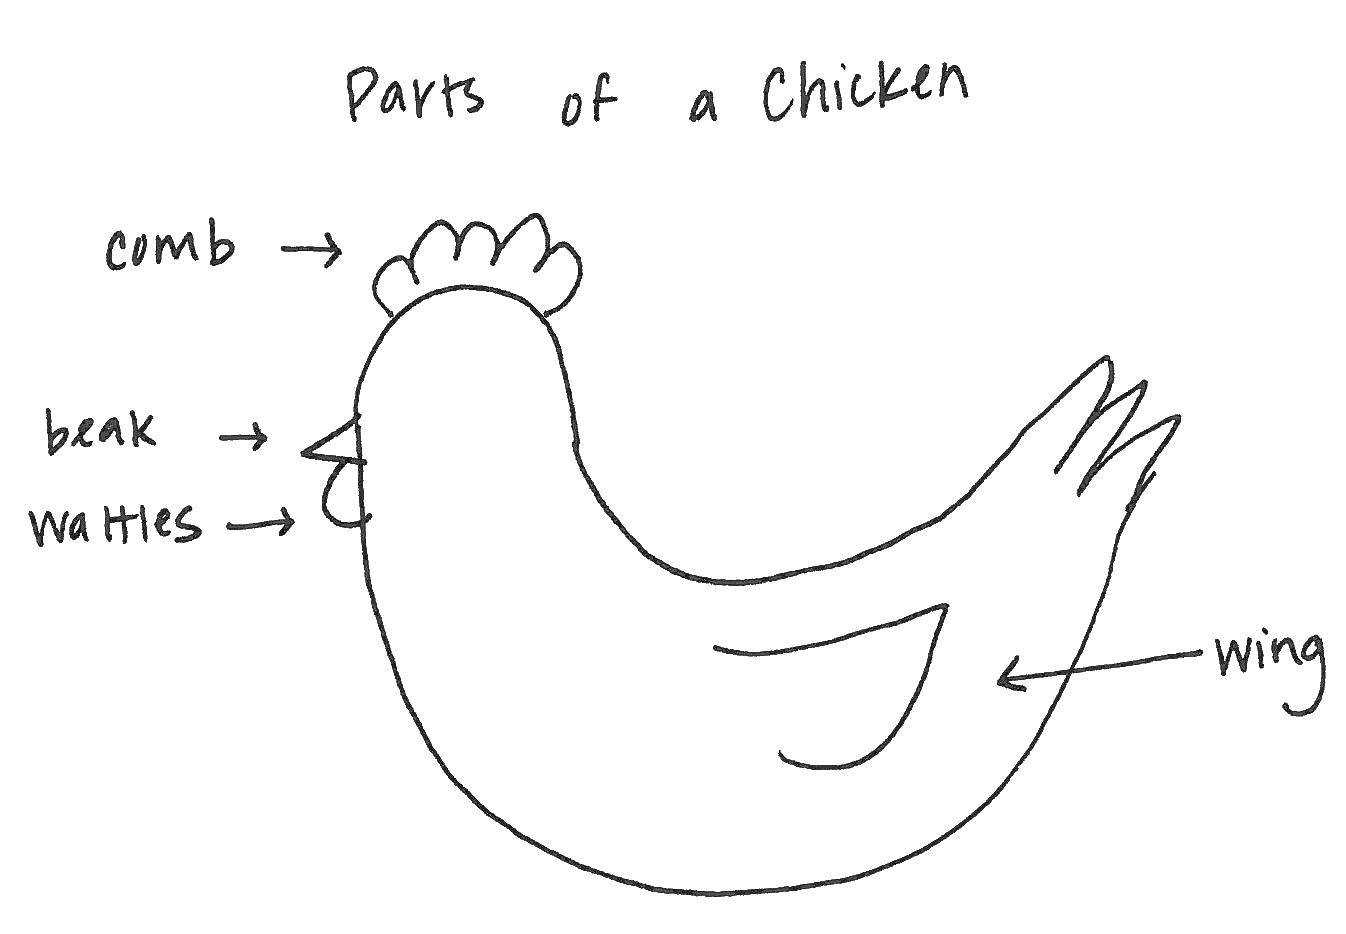 Coloring The structure of the chicken. Category The contours for cutting out the birds. Tags:  Chicken, poultry.